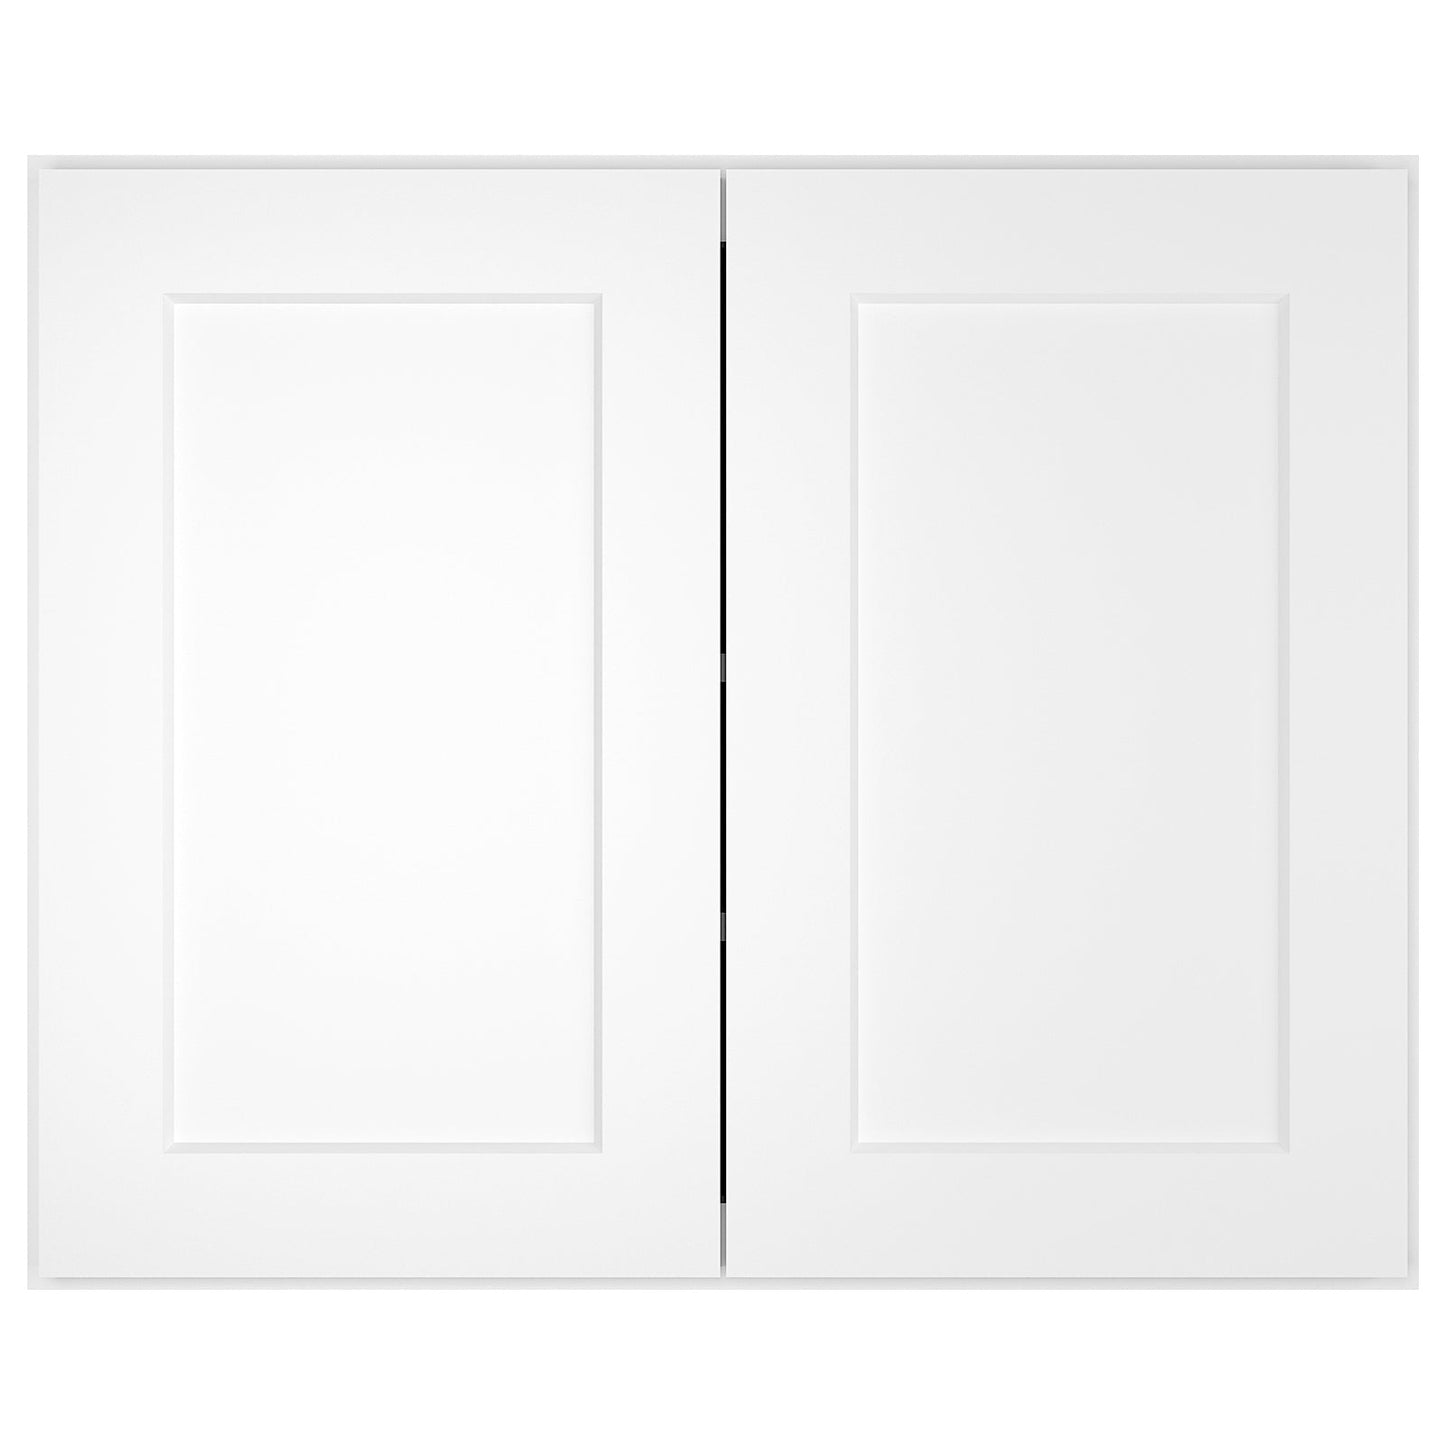 Medicine Cabinet Wall Mounted W302424